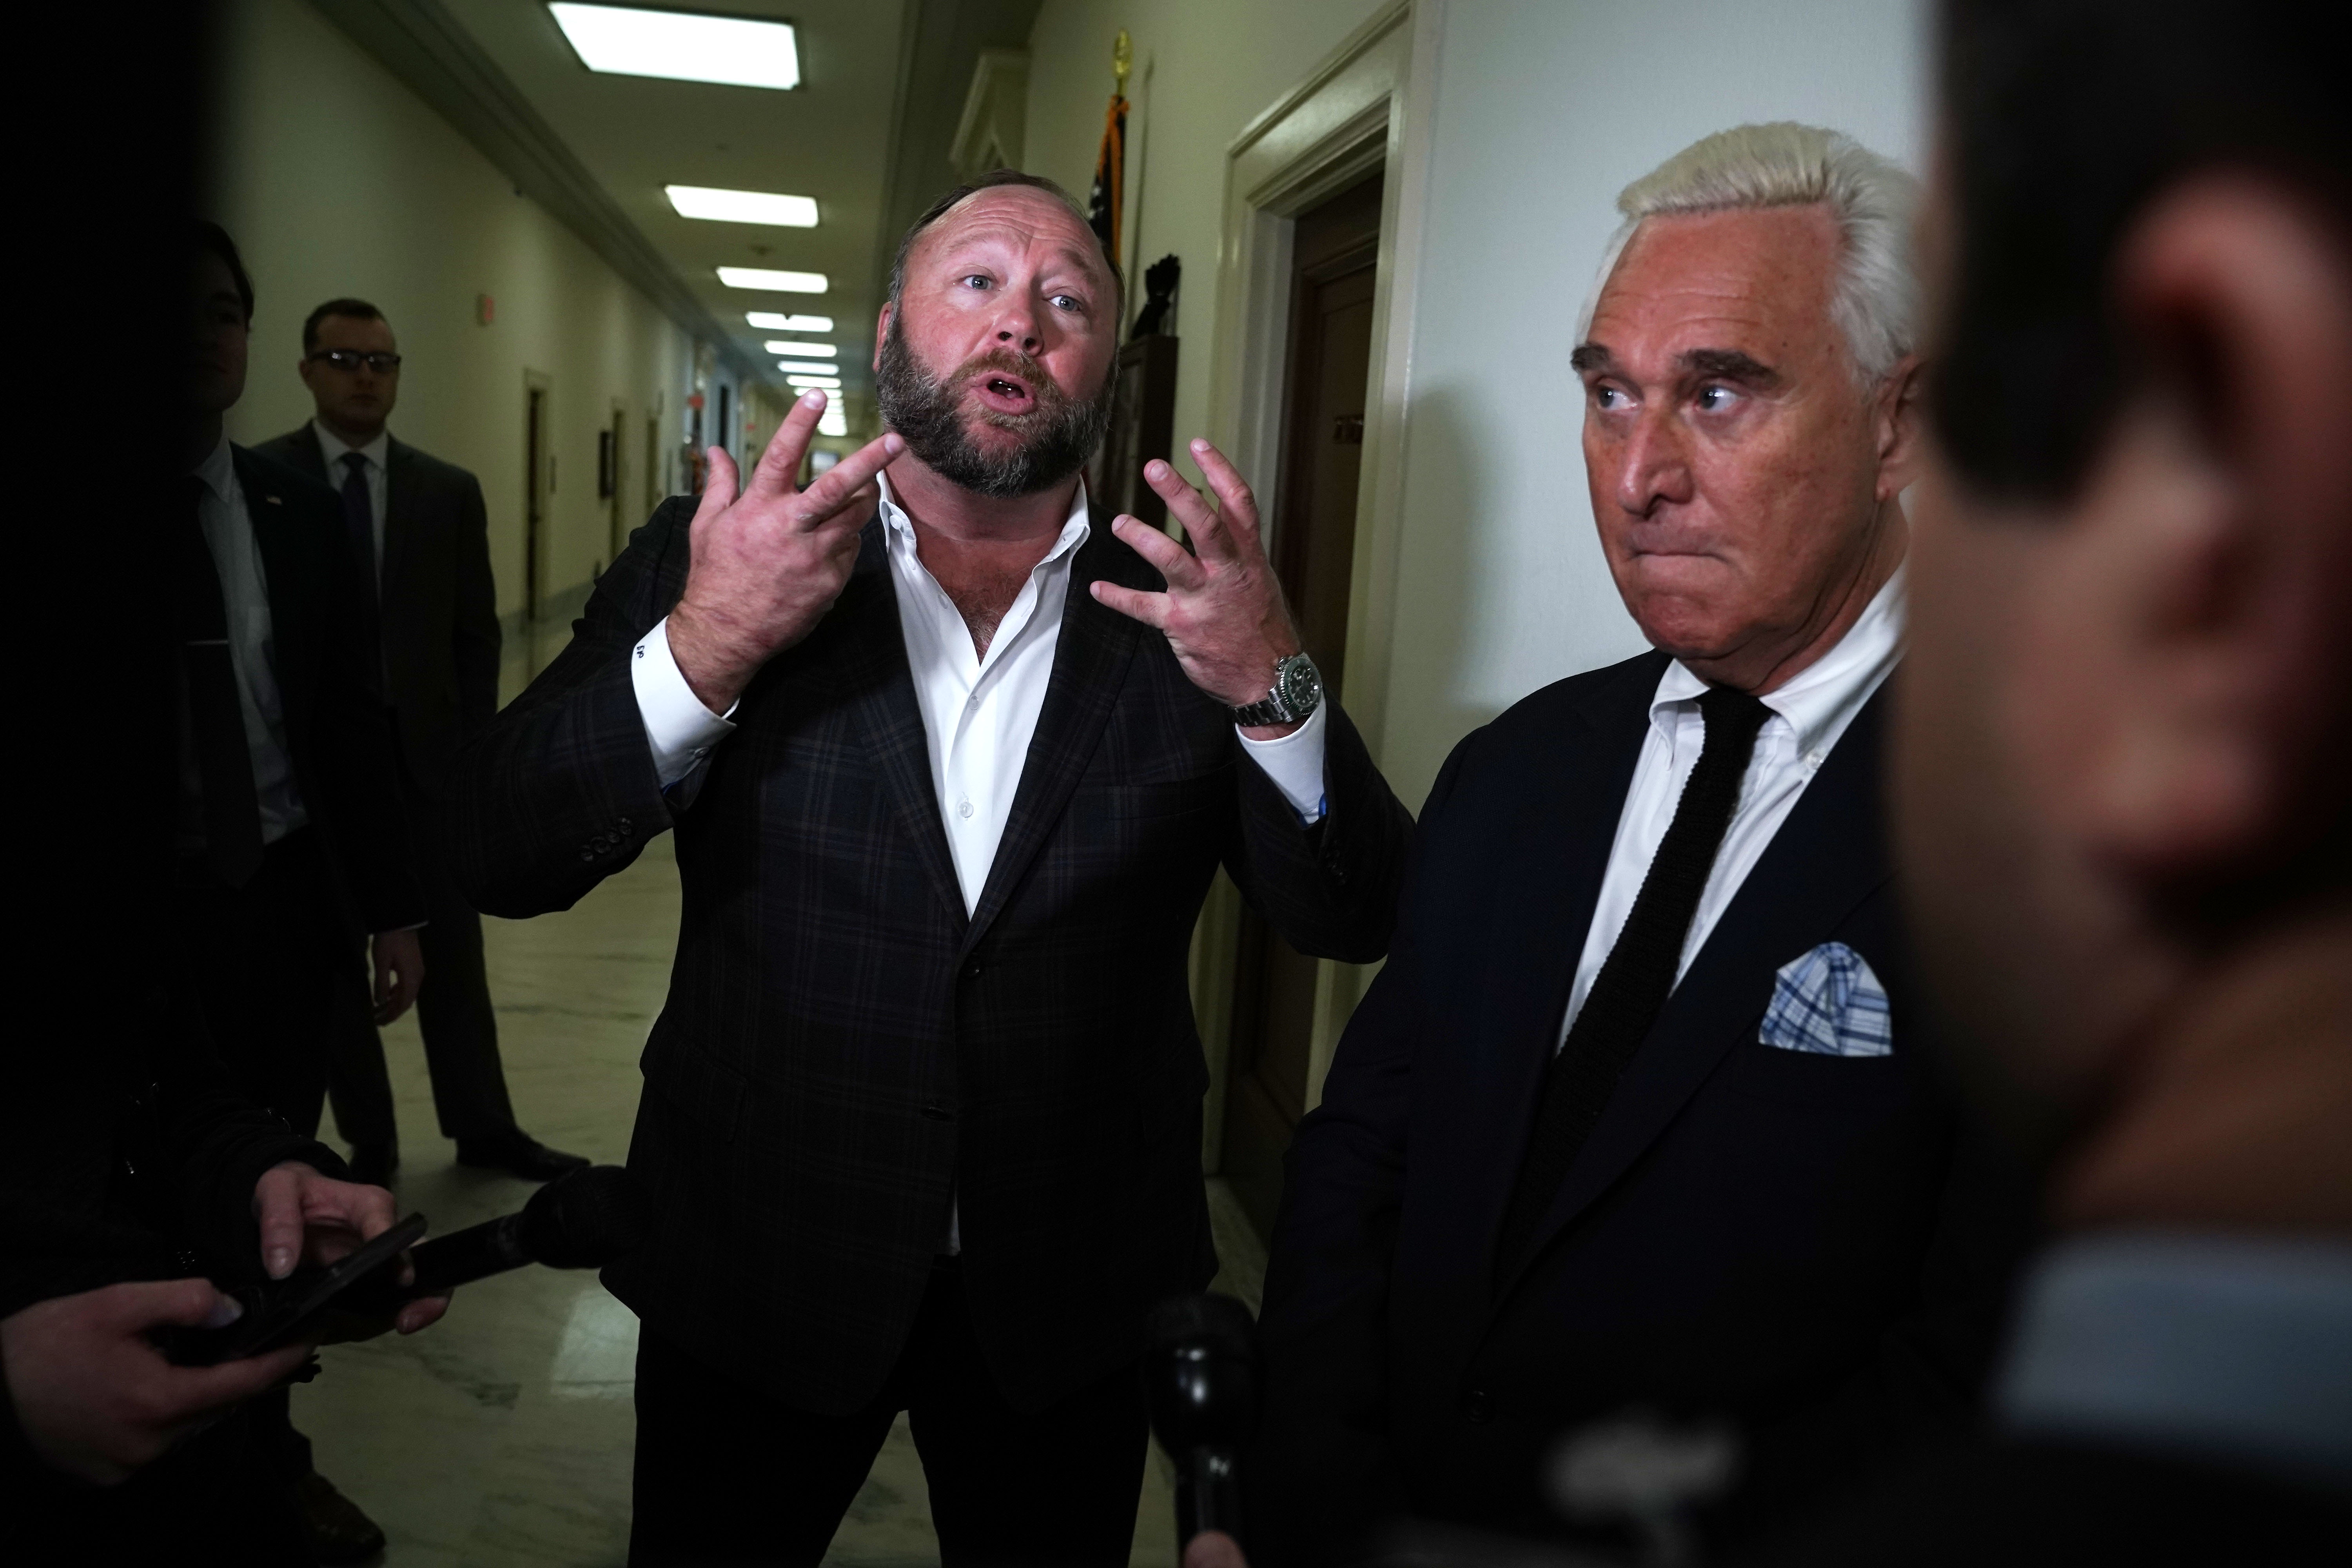 Conspiracy theorist Alex Jones and longtime Trump adviser Roger Stone on Capitol Hill in December 2018.